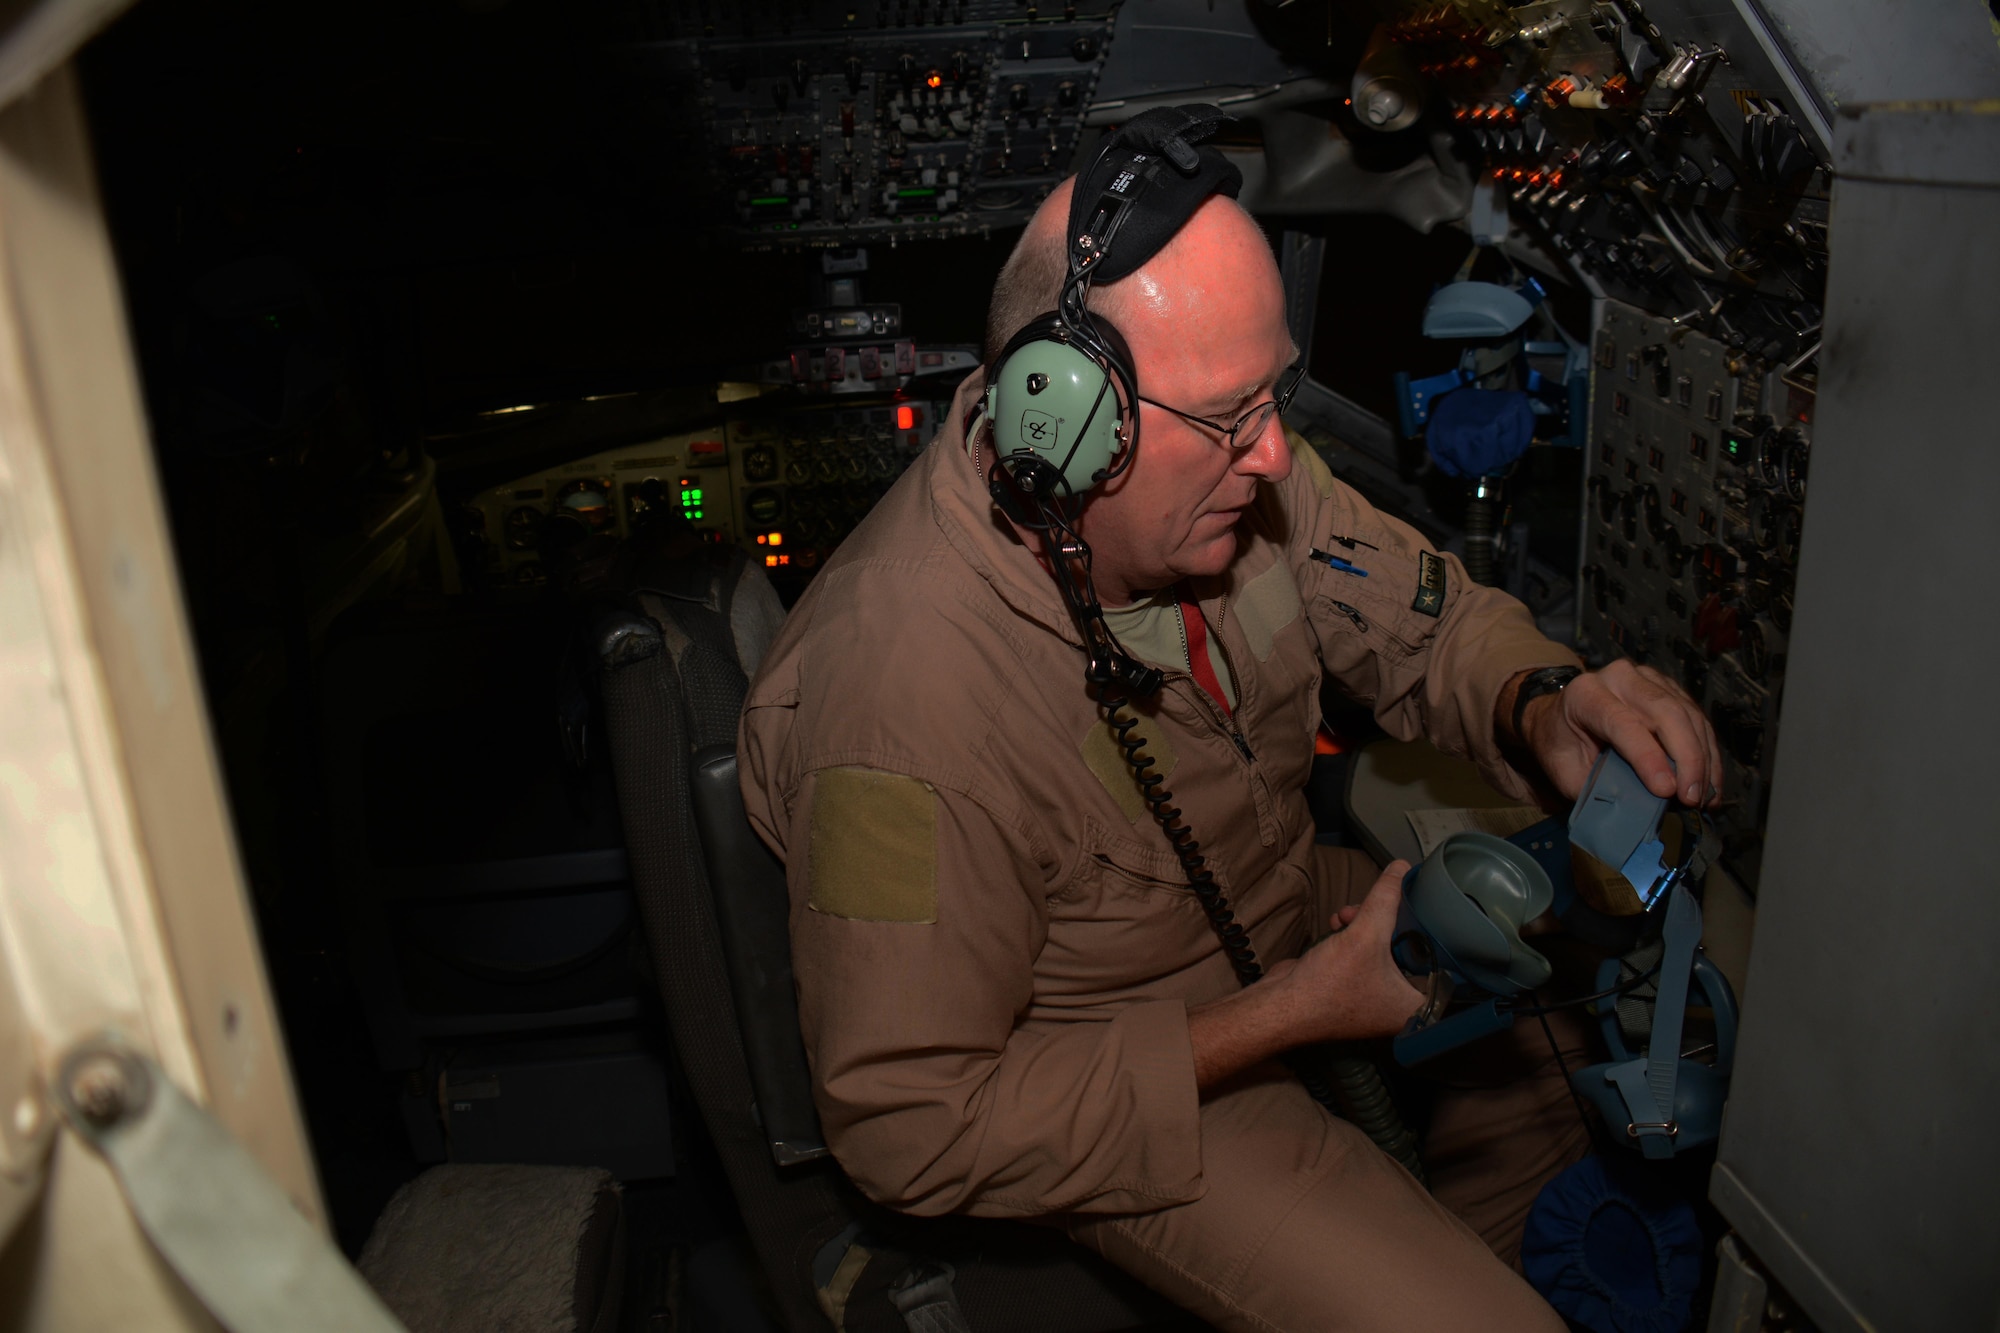 Master Sgt. Curtis Stark, 7th Expeditionary Air Combat Control Squadron superintendent, inspects an emergency oxygen mask during a pre-flight inspection in the cockpit of an E-8C Joint Surveillance Target Attack Radar System aircraft at Al Udeid Air Base, Qatar Nov. 14. Stark has deployed 17 times with JSTAR aircraft in support of contingency operations and has accumulated more than 4,000 combat flying hours. After nearly 30 years of service he plans to retire from the Air Force in March 2016. (U.S. Air Force photo by Tech. Sgt. James Hodgman/Released)